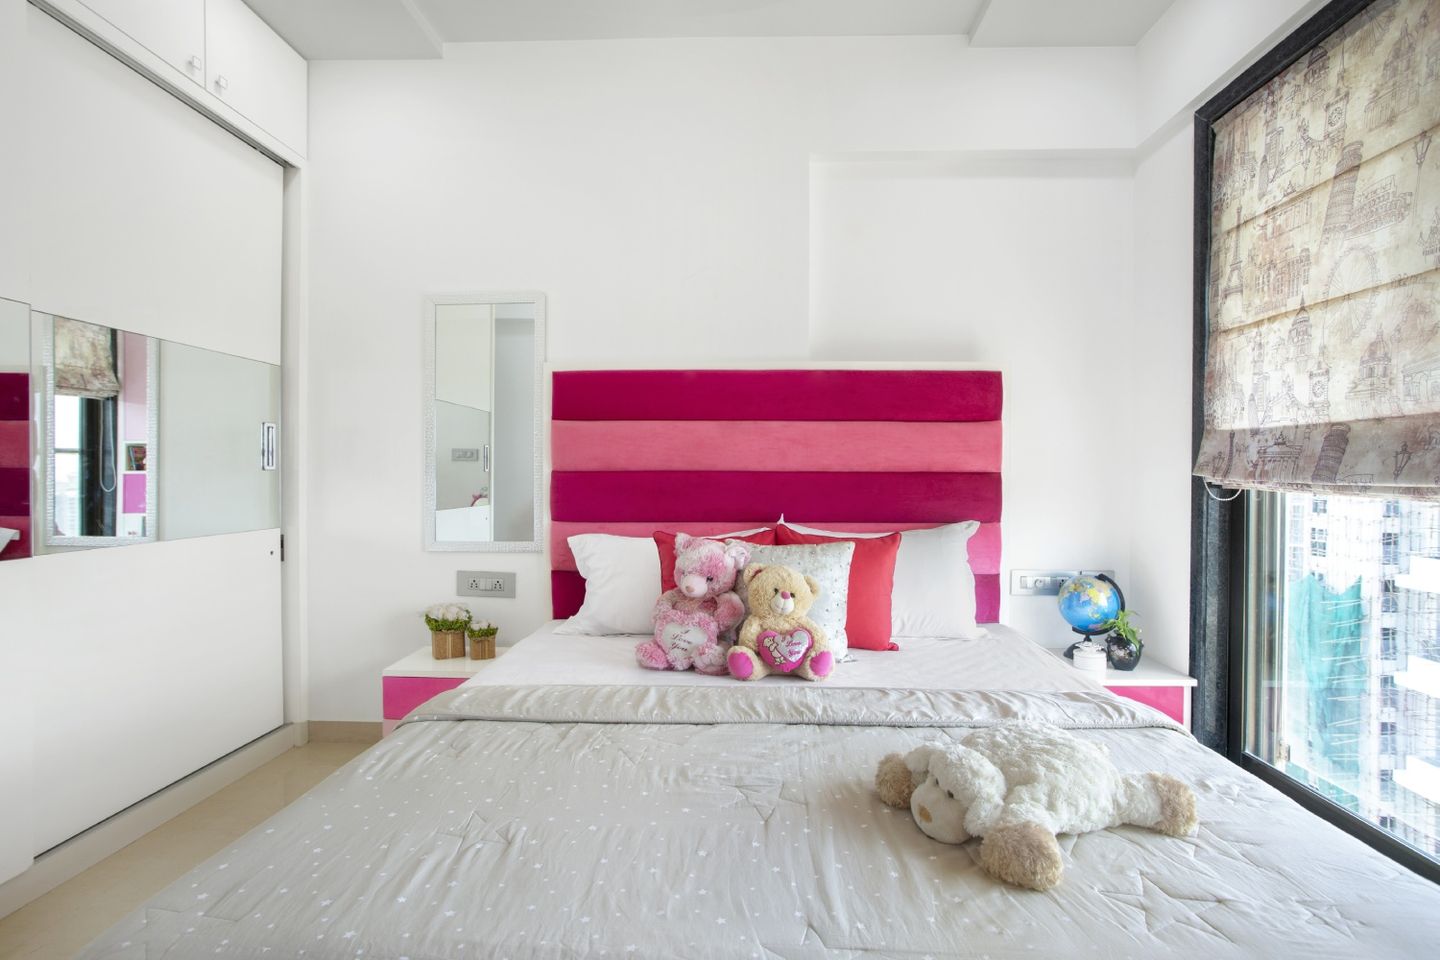 Kids' Bedroom With Drawers And Wall Storage - Livspace